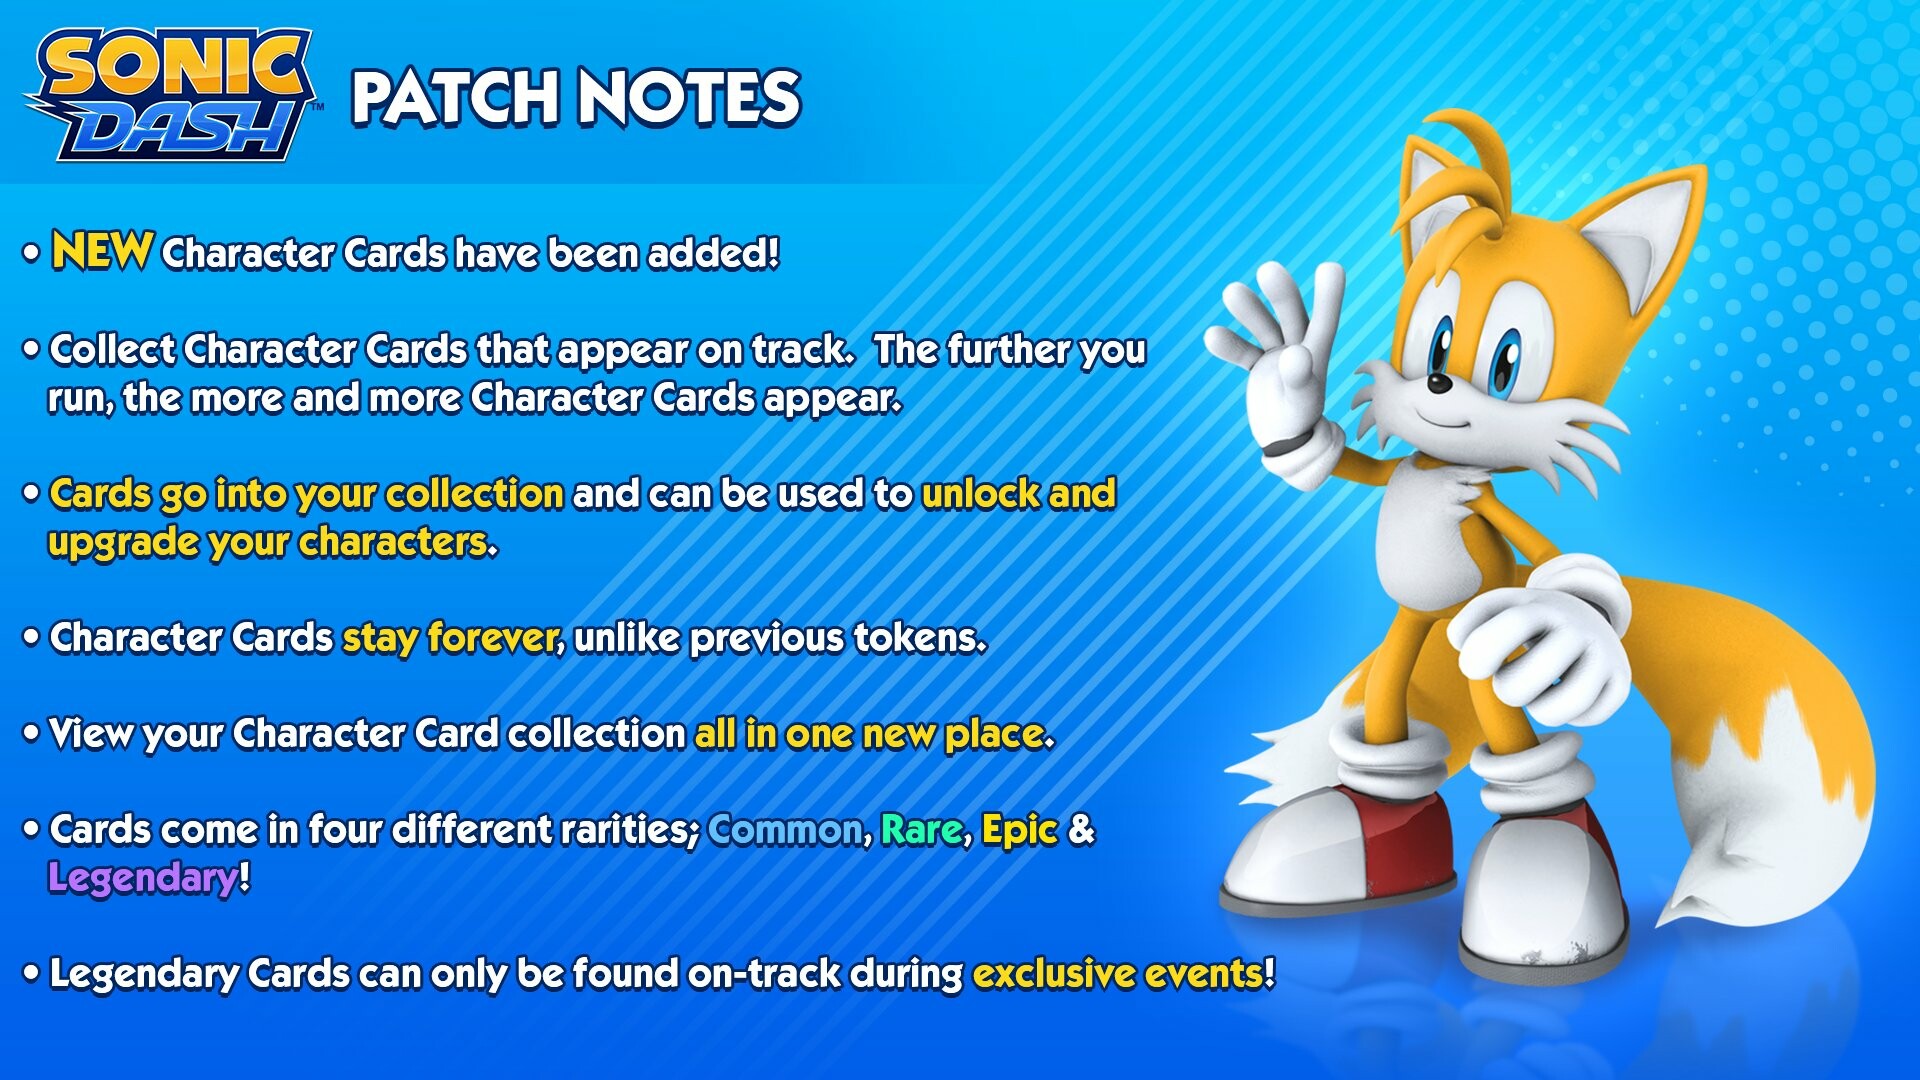 How Fast Can You Touch Every Character's Color In Sonic Speed